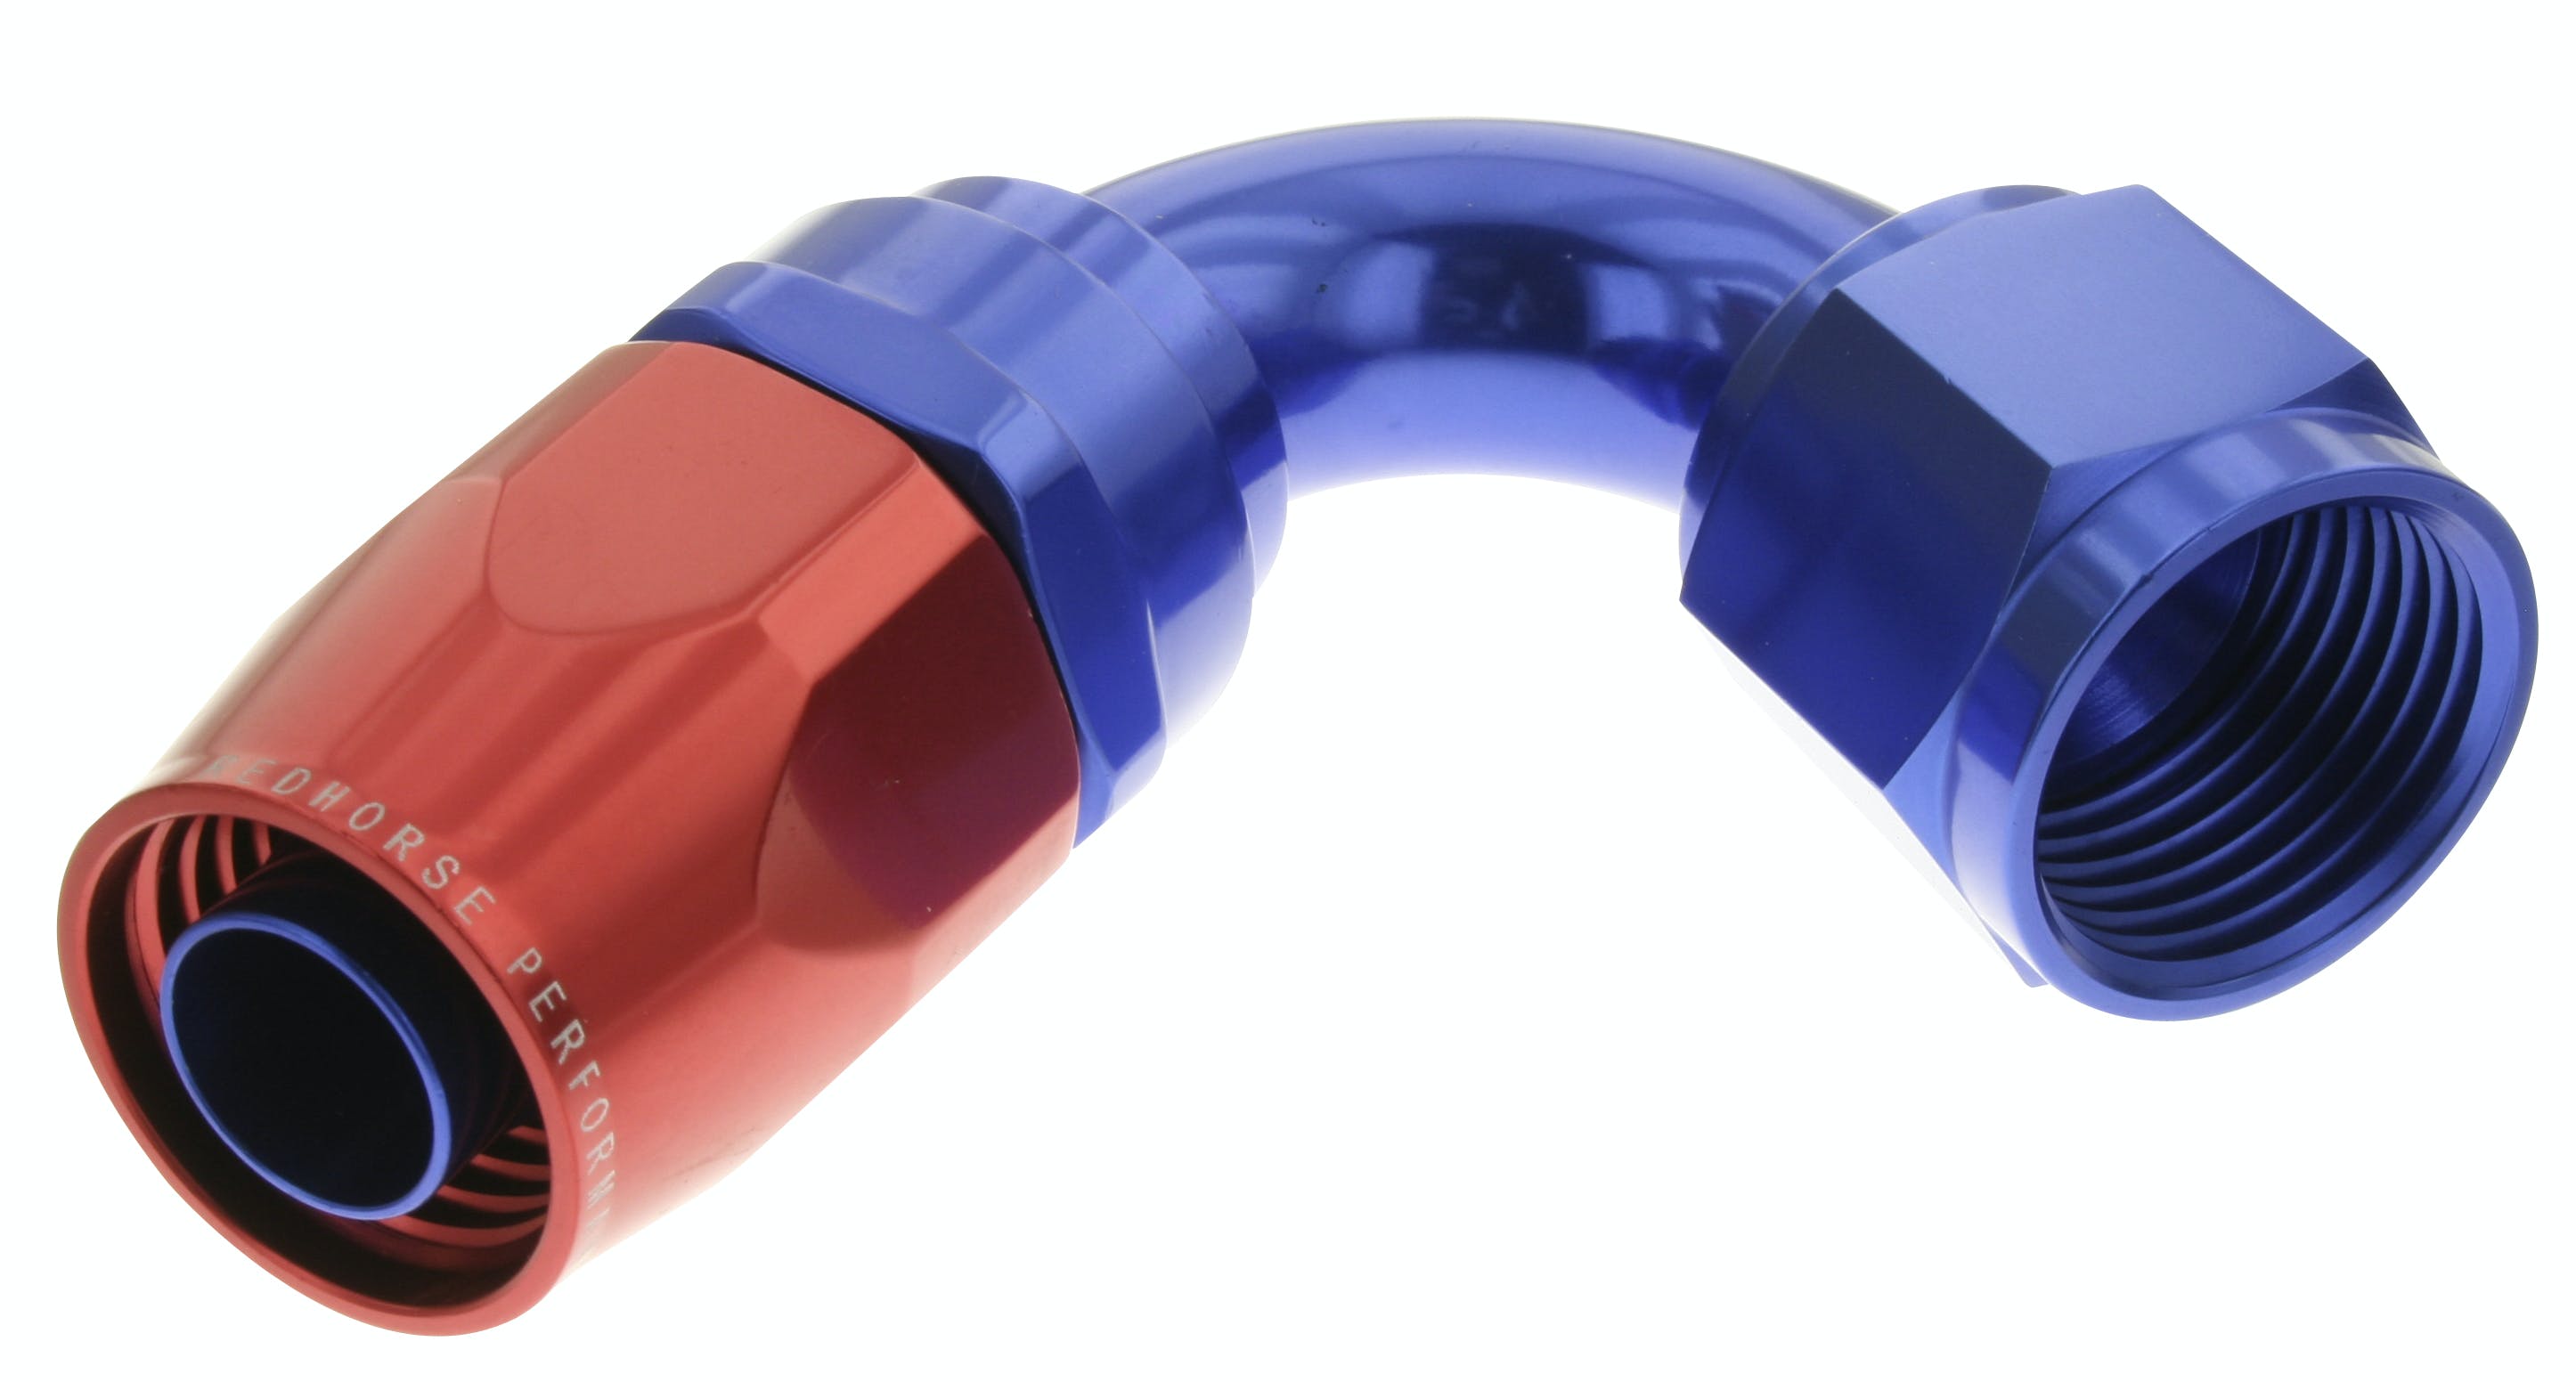 Redhorse Performance 1120-08-1 -08 120 degree Female Aluminum Hose End - red and blue